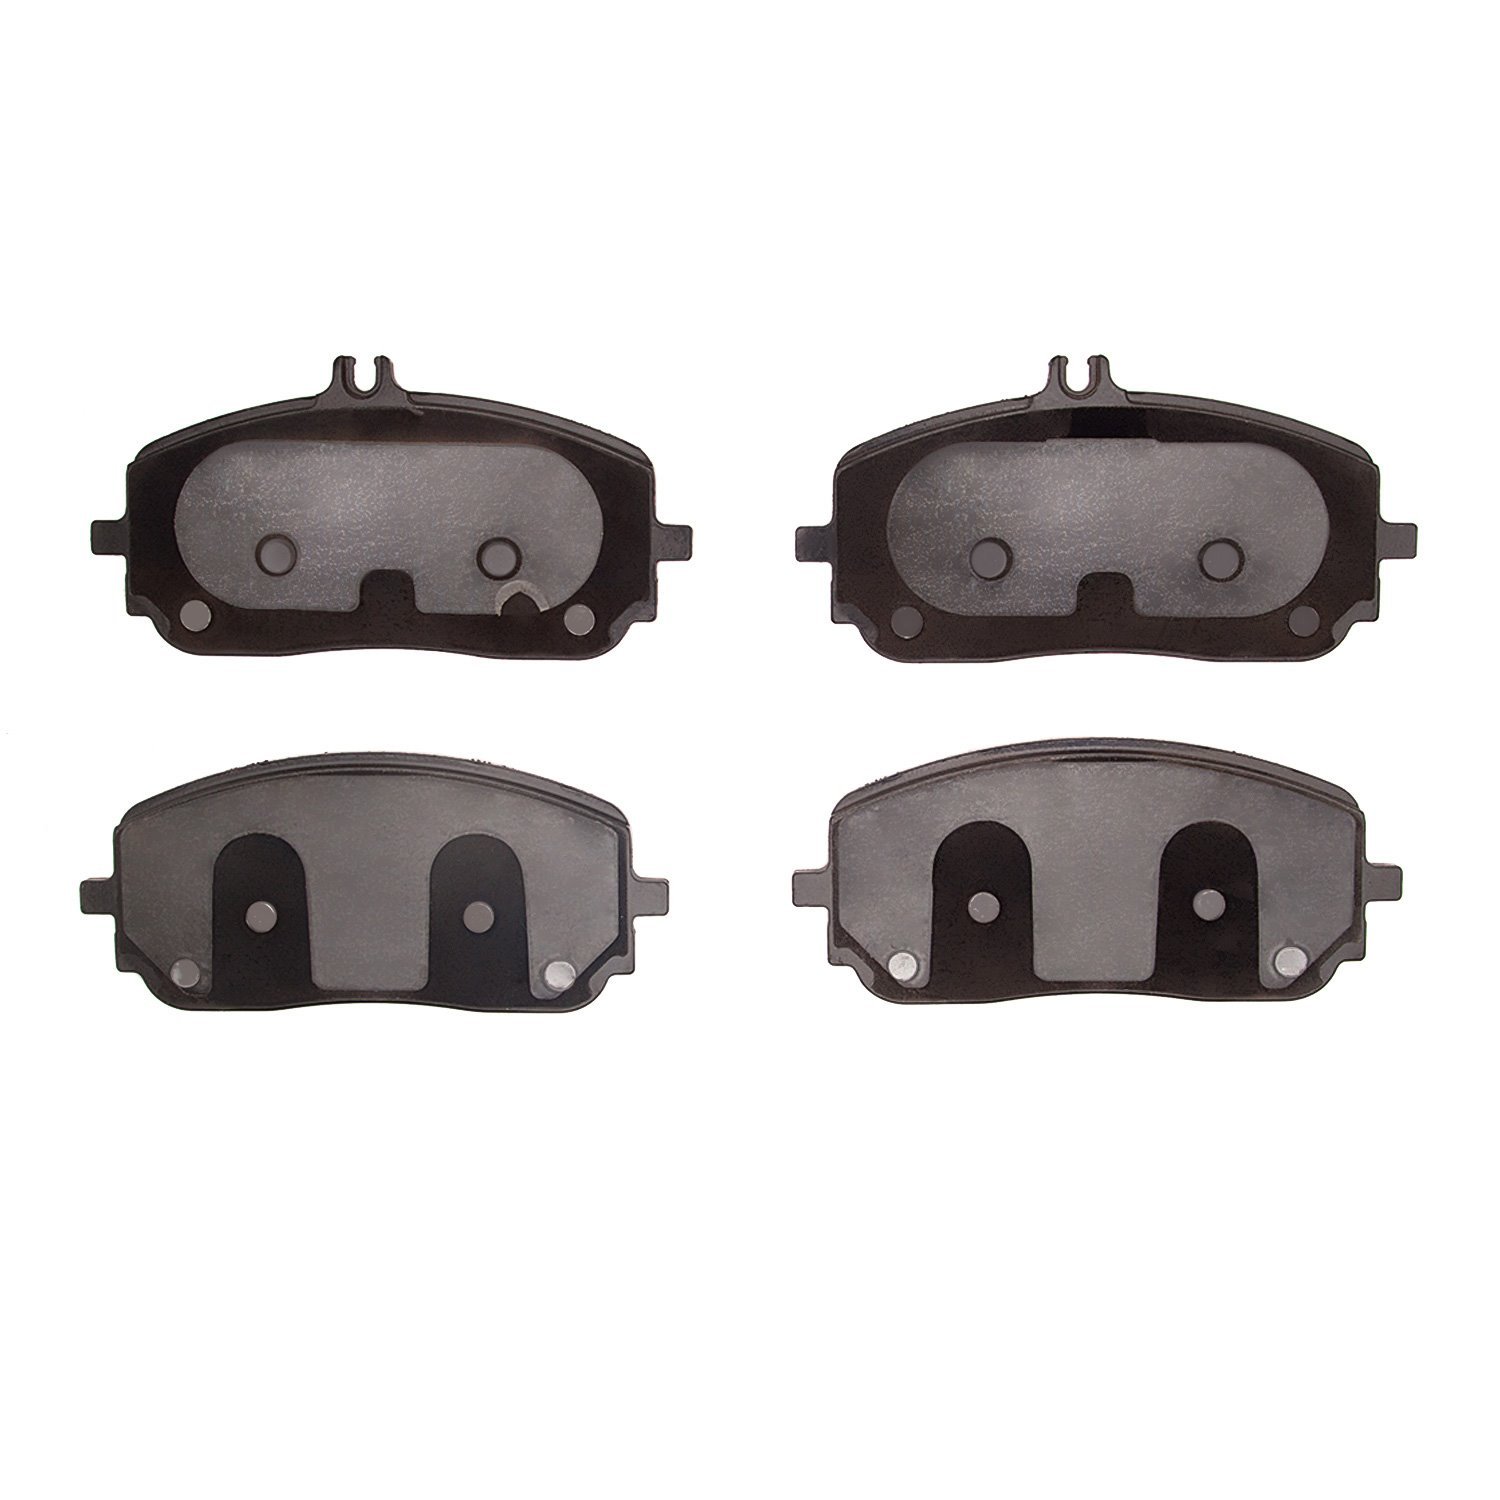 1600-2209-00 5000 Euro Ceramic Brake Pads, Fits Select Mercedes-Benz, Position: Front